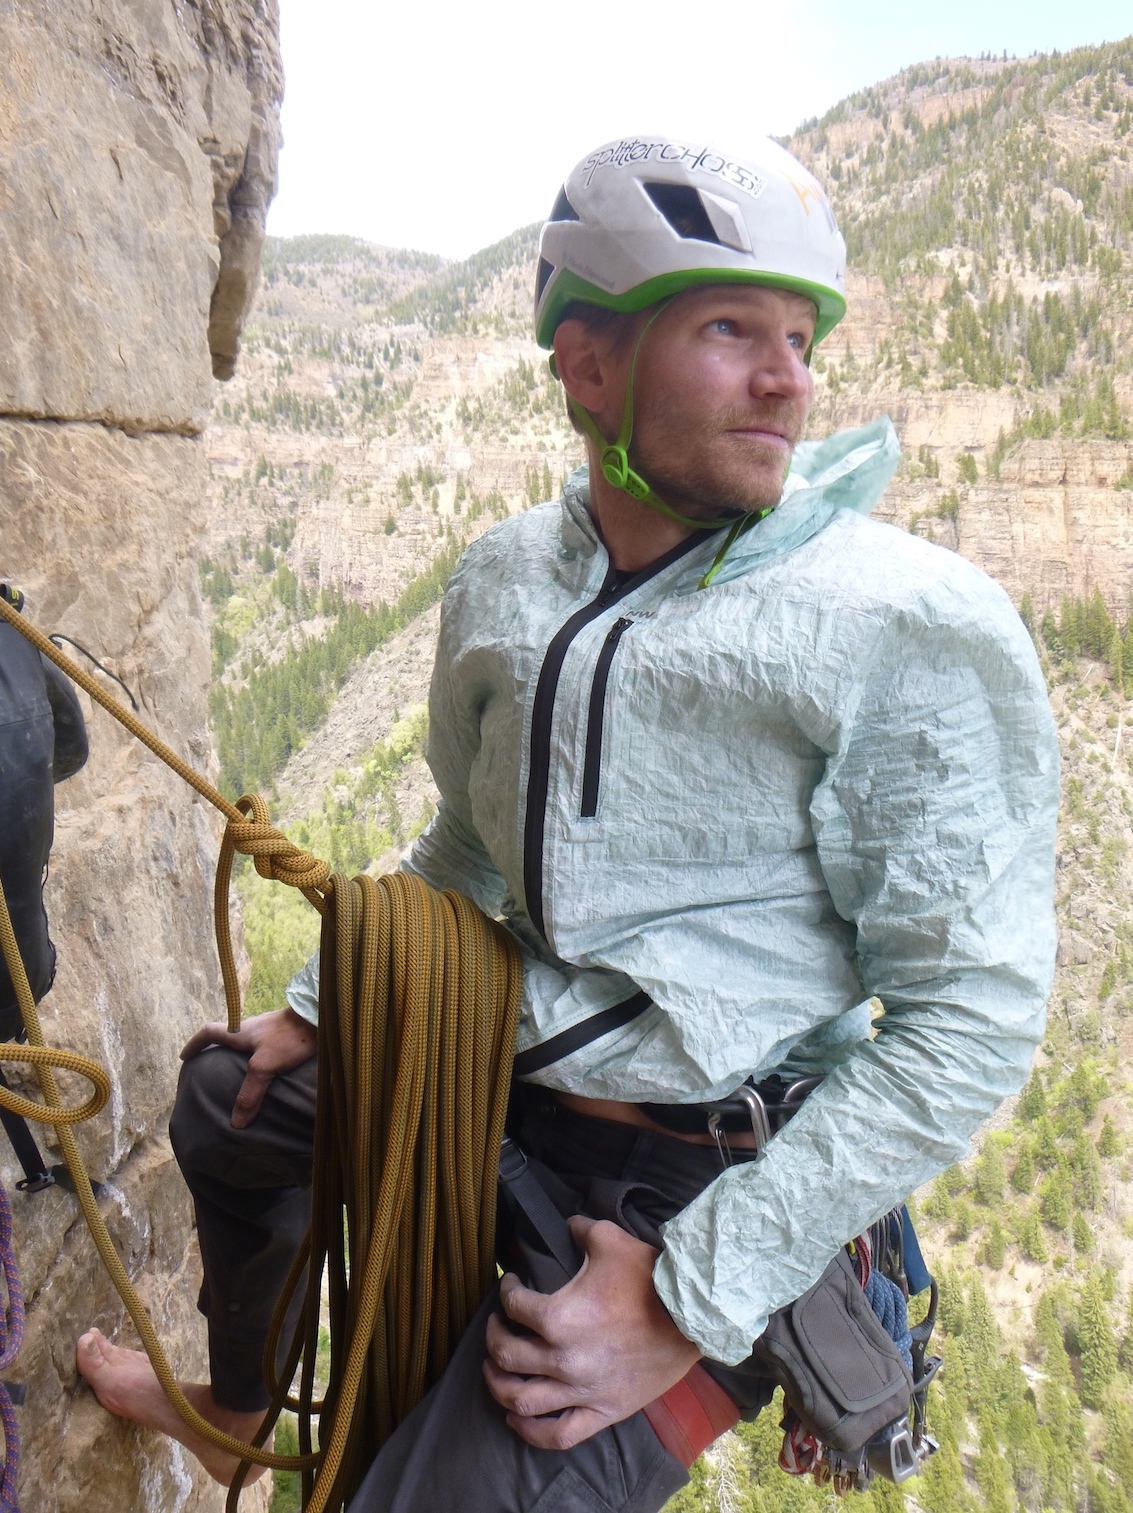 Derek Franz stays warm at a breezy belay with NW Alpine's Eyebright jacket atop Pitch 4 of Horse and Pony Show (III 5.11d) on the obscure Grizzly Creek Wall in Glenwood Canyon, Colorado. [Photo] Craig Helm